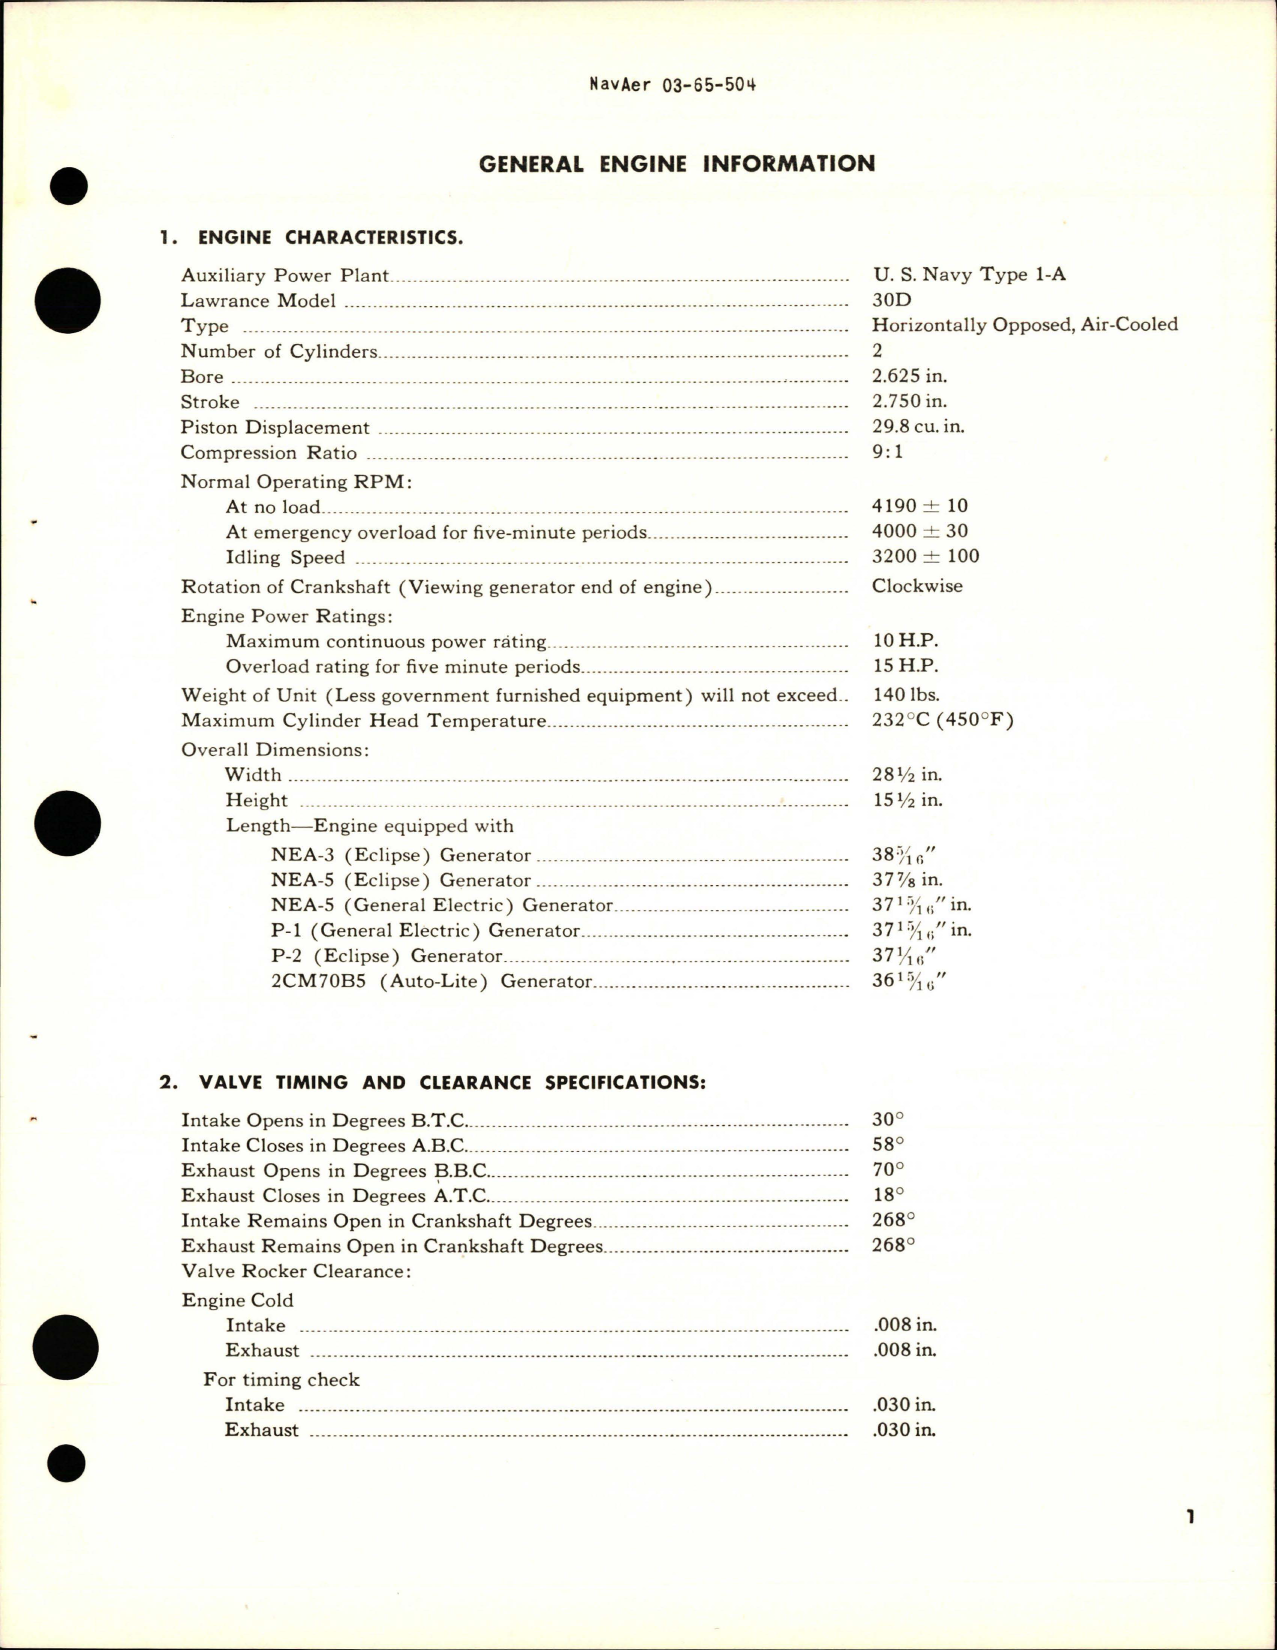 Sample page 9 from AirCorps Library document: Service Instructions for Auxiliary Power Plant - Type 1-A - Model 30D 